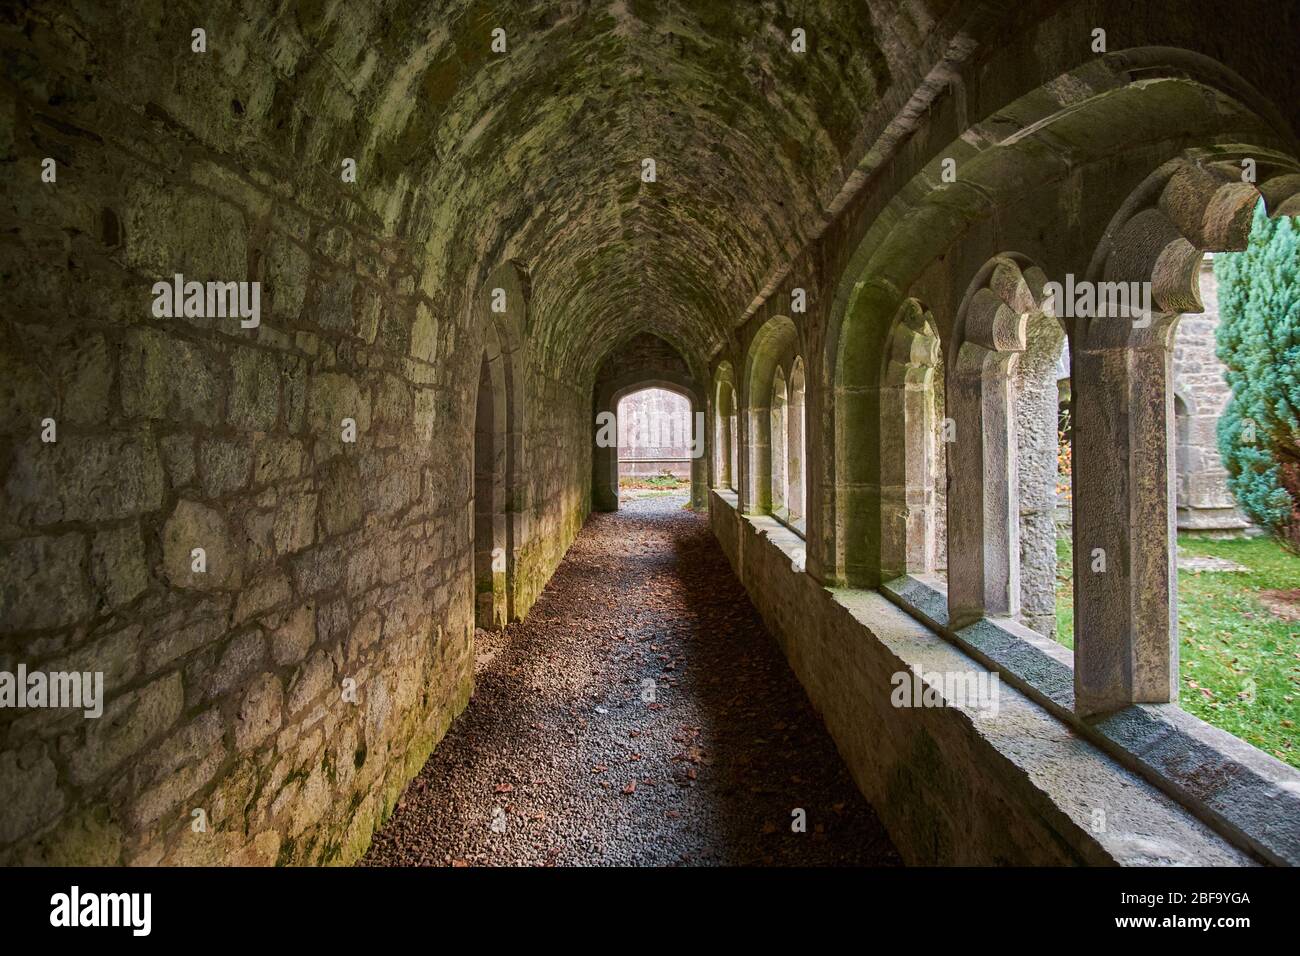 Inside cloister walk Old Augustinian Friary East of Adare, Ireland with windows to courtyard on right Gortaganniv, Gortaganniff, Co. Clare Stock Photo